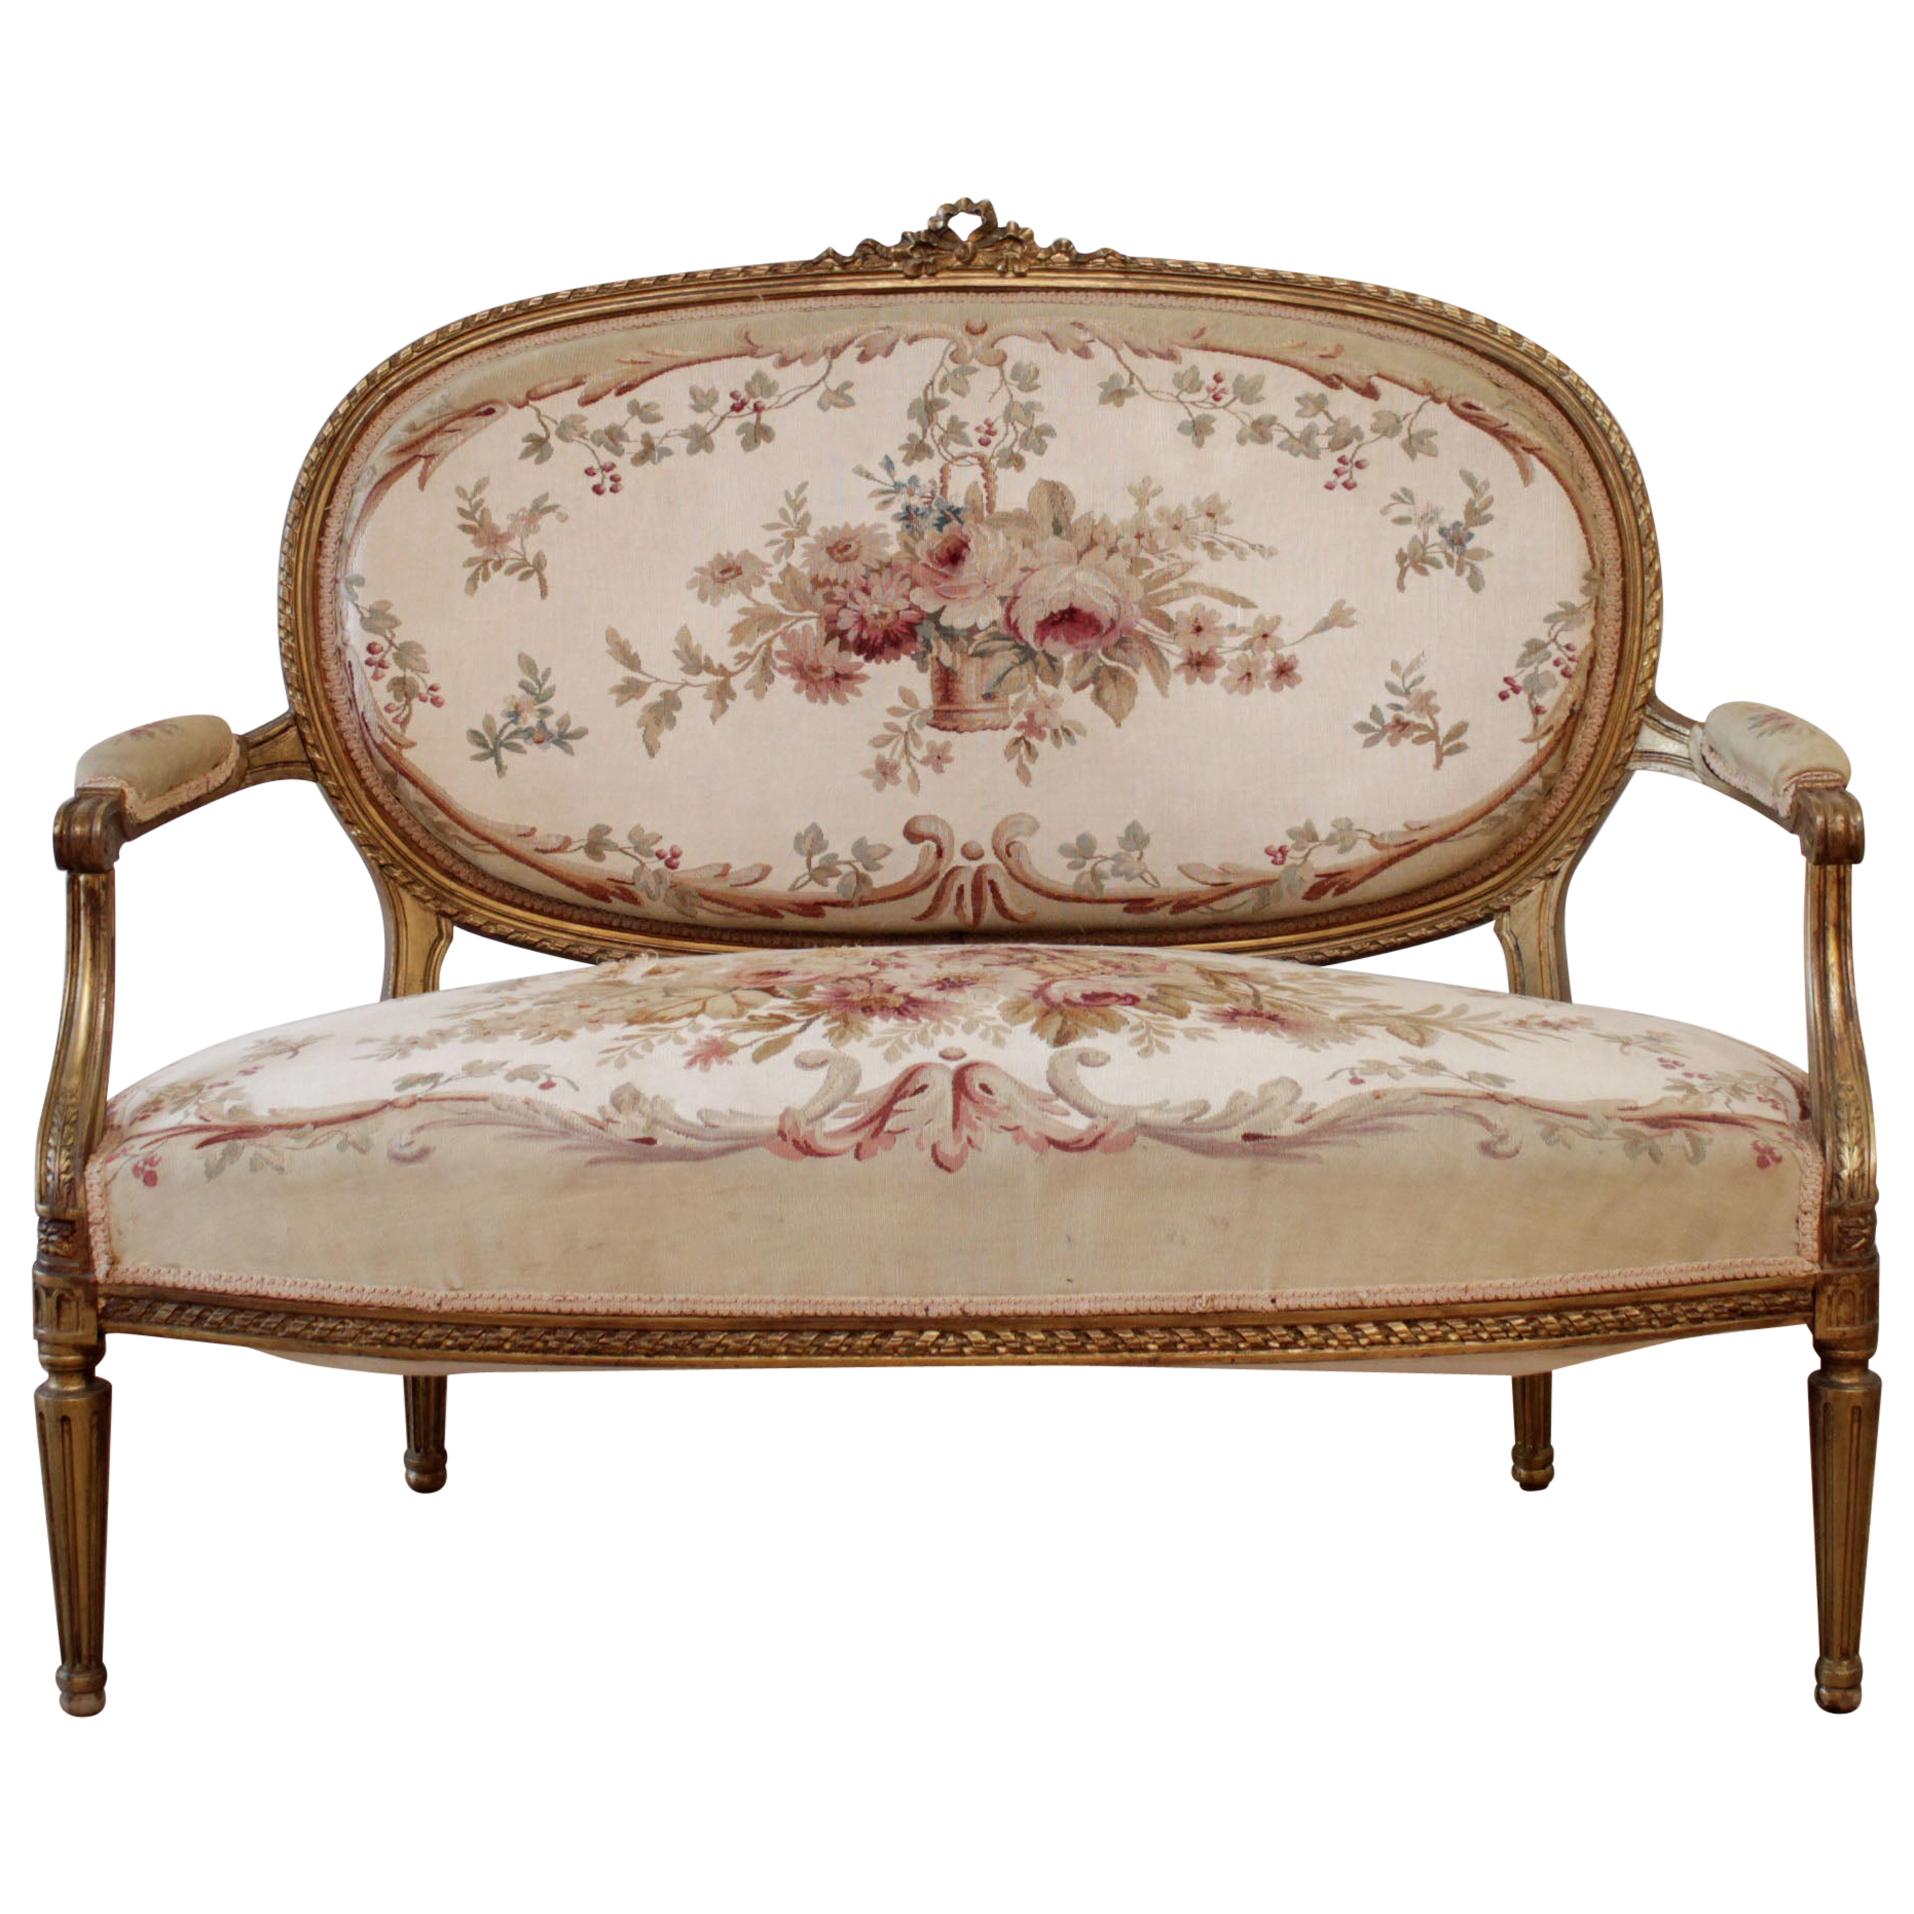 Antique Giltwood Ribbon Carved Louis XVI Style Settee with Needlepoint